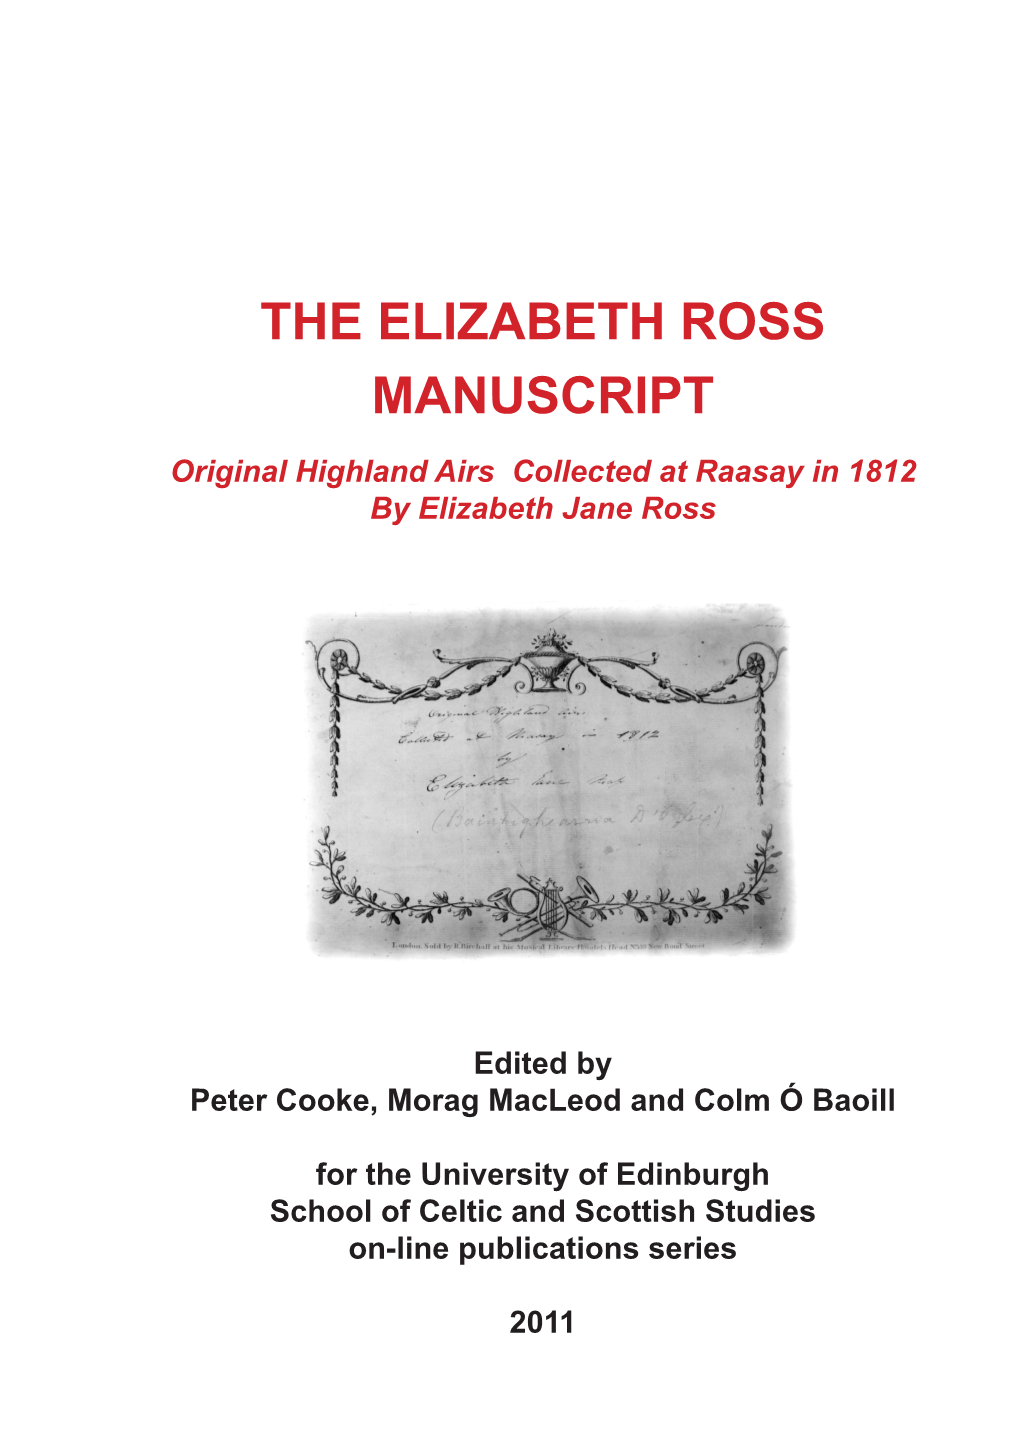 THE ELIZABETH ROSS MANUSCRIPT Original Highland Airs Collected at Raasay in 1812 by Elizabeth Jane Ross